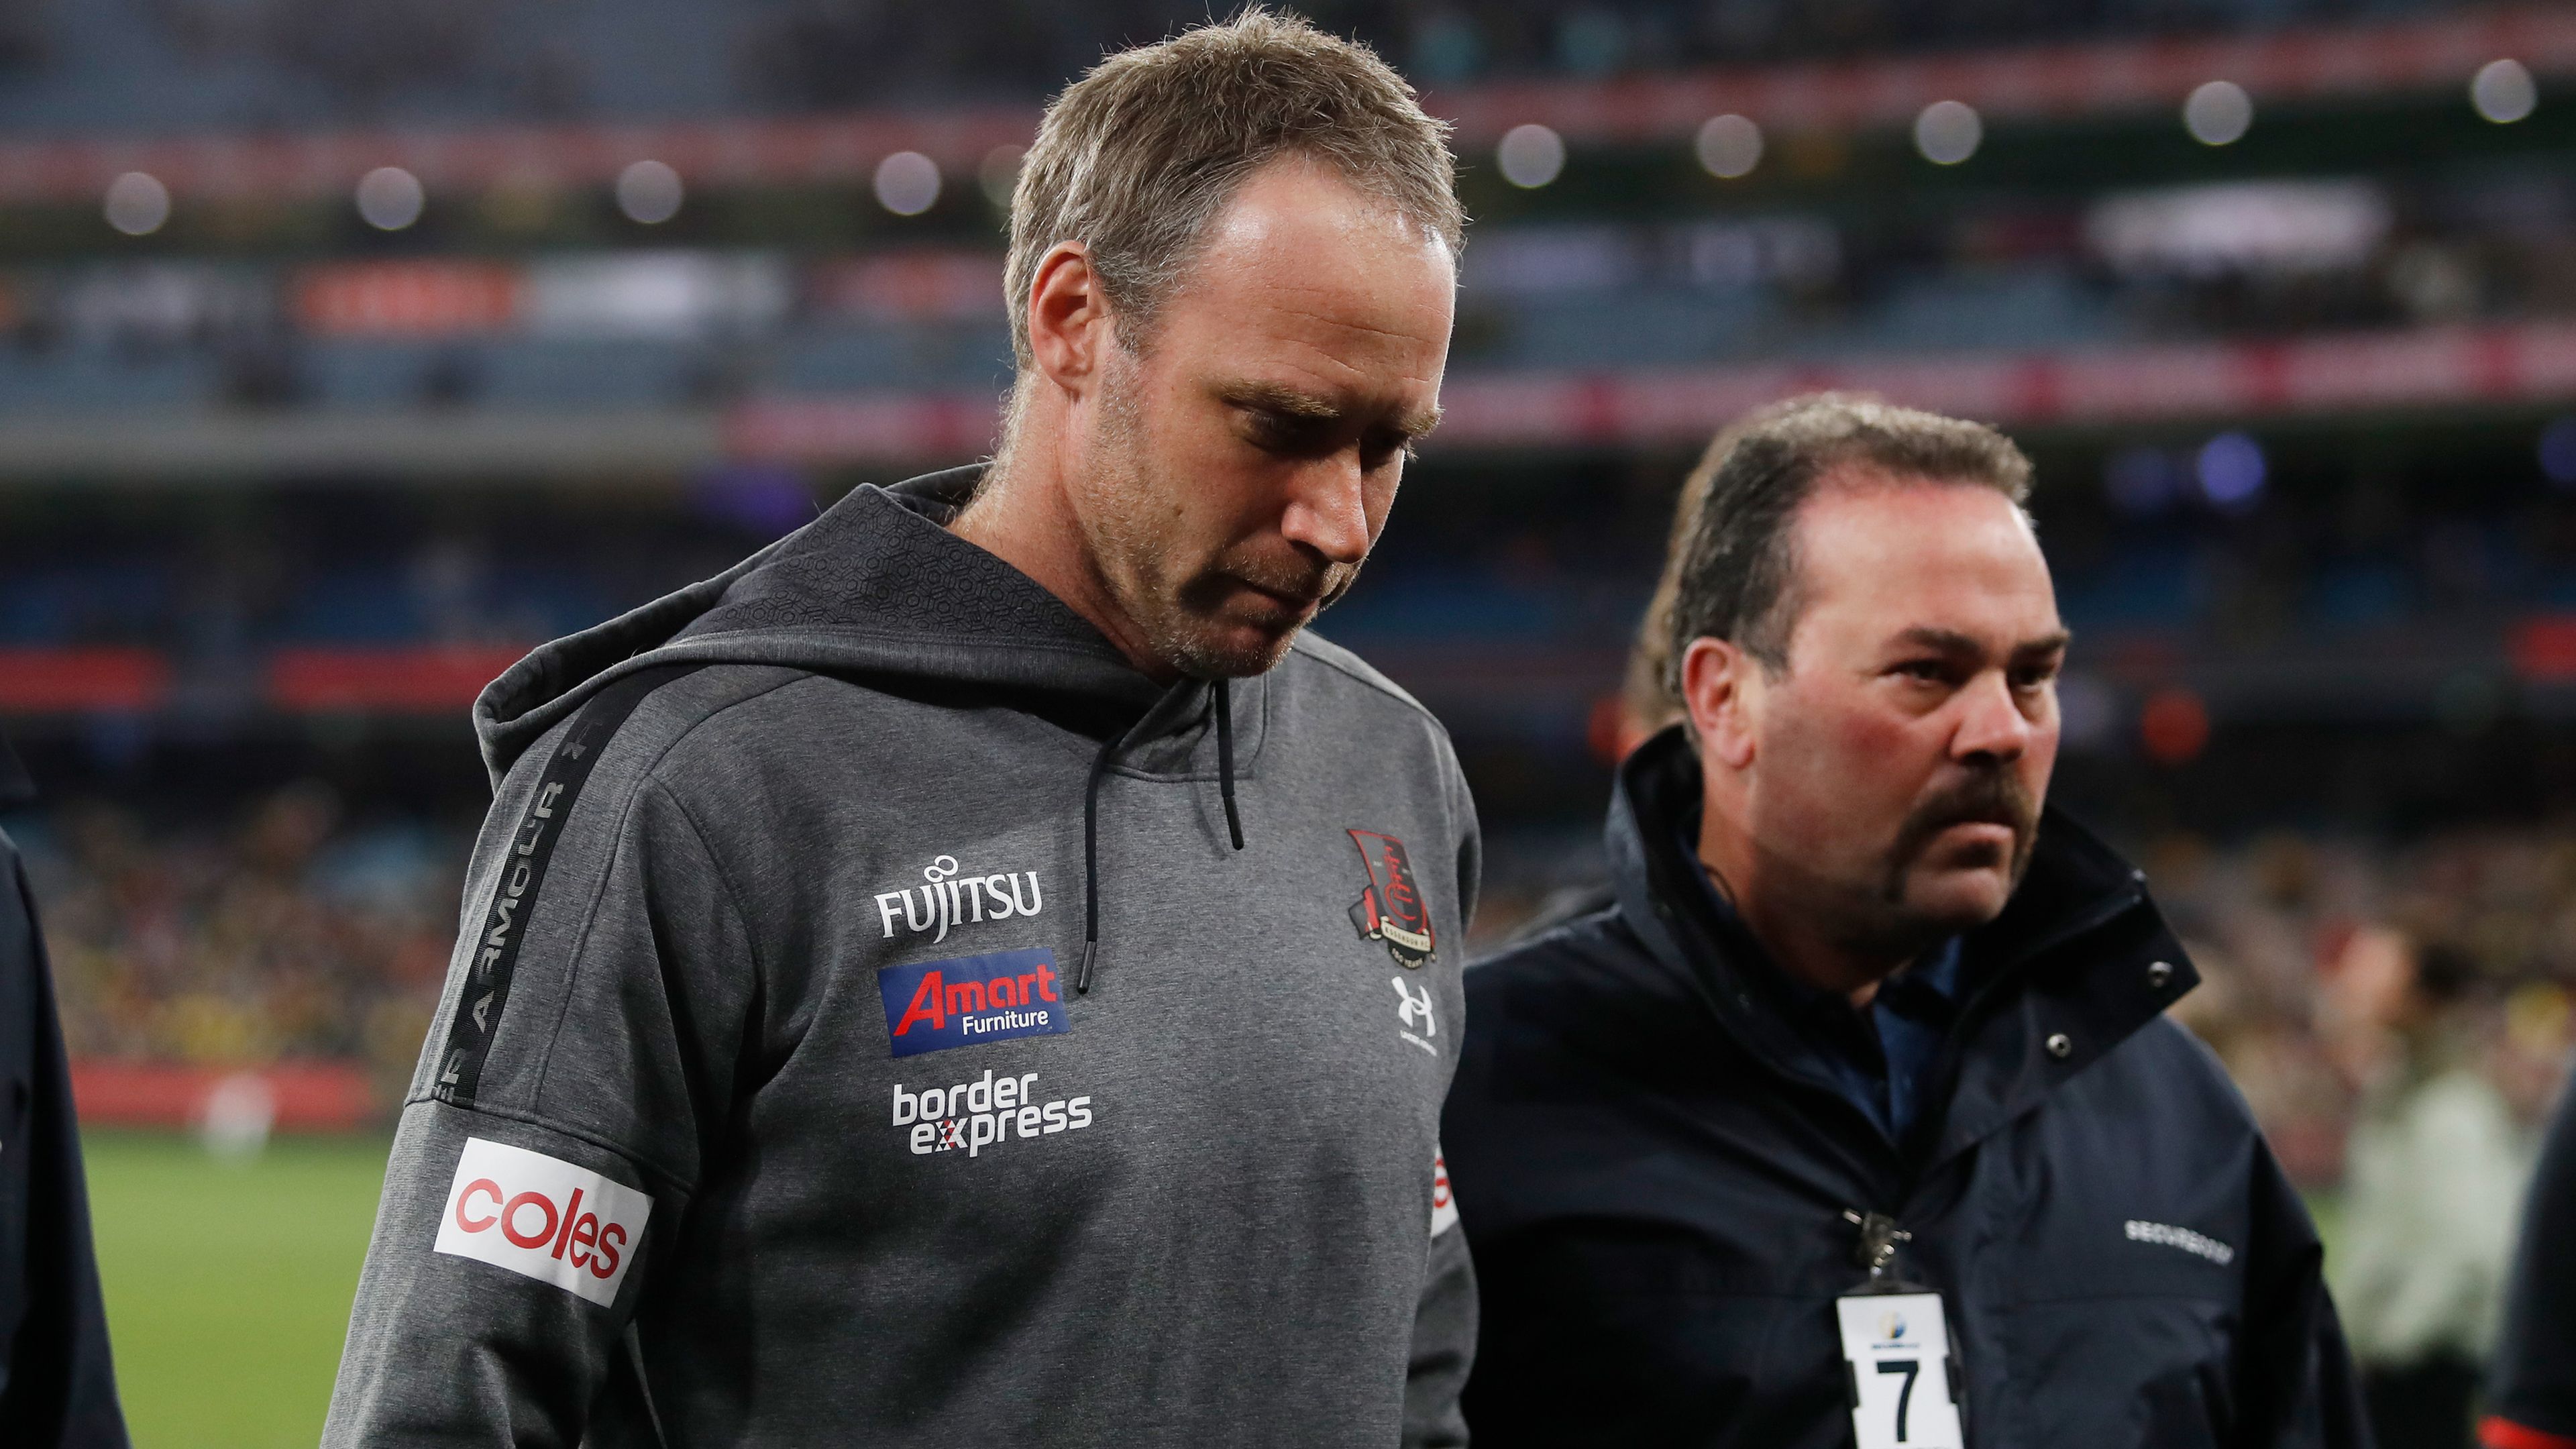 Bombers bosses 'need to leave' after 'throwing' coach Ben Rutten 'under the bus'